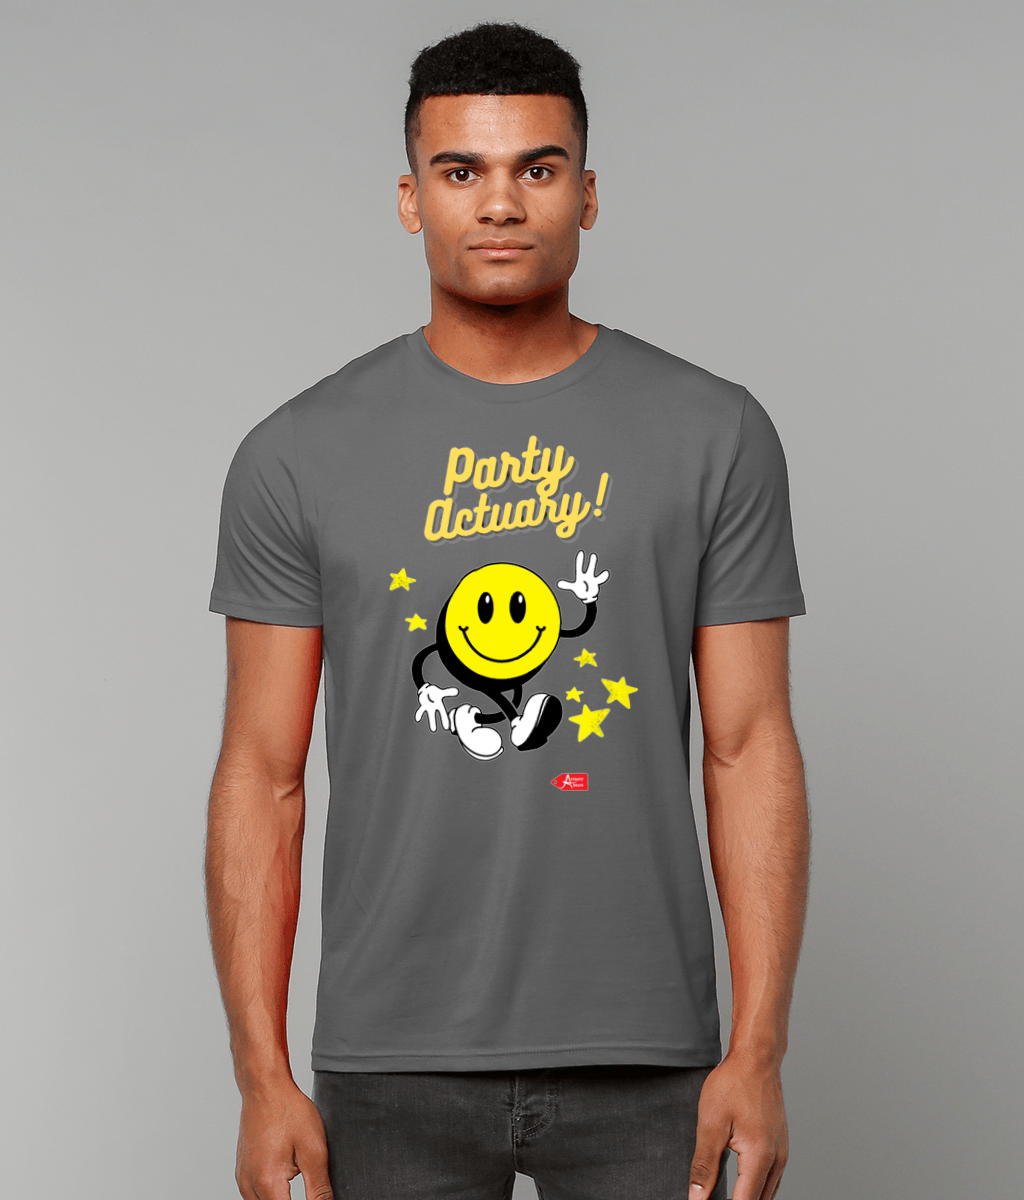 Party Actuary Yellow Cheerful Good Times T-Shirt (Grey and White Variants)